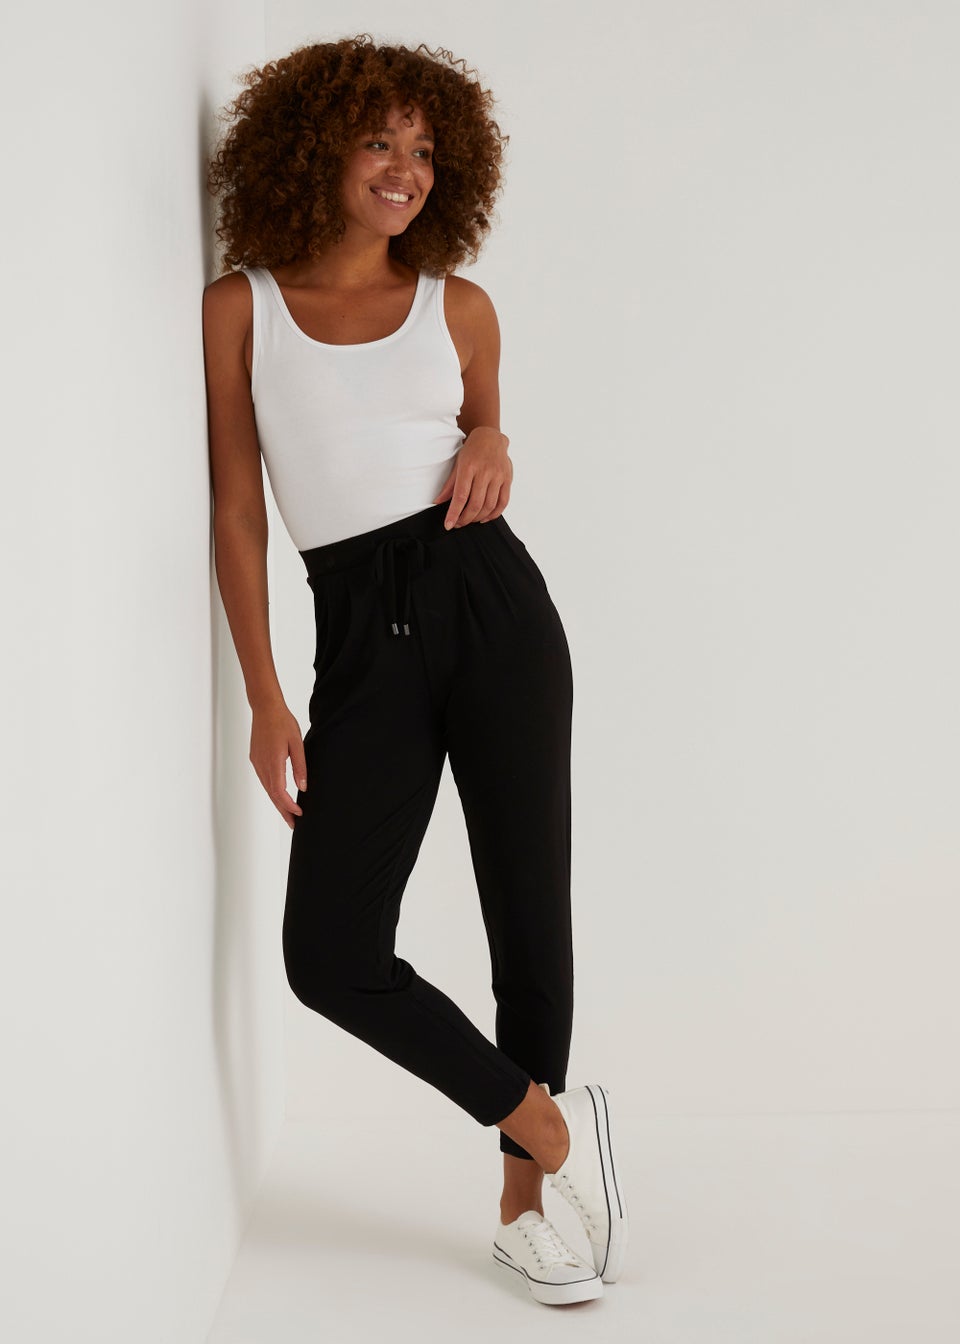 Top more than 69 harem trousers matalan best - in.cdgdbentre